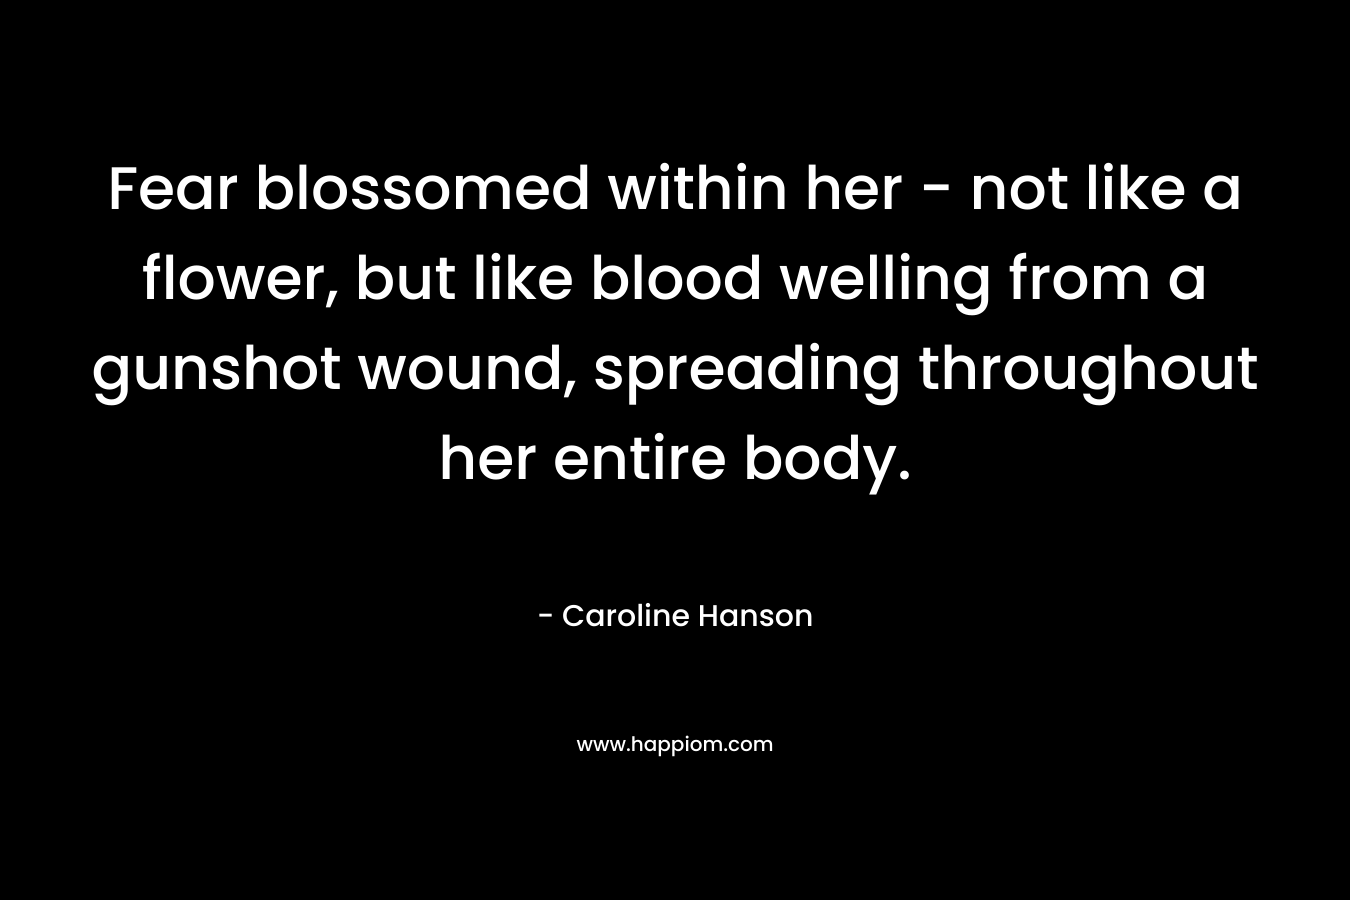 Fear blossomed within her – not like a flower, but like blood welling from a gunshot wound, spreading throughout her entire body. – Caroline Hanson